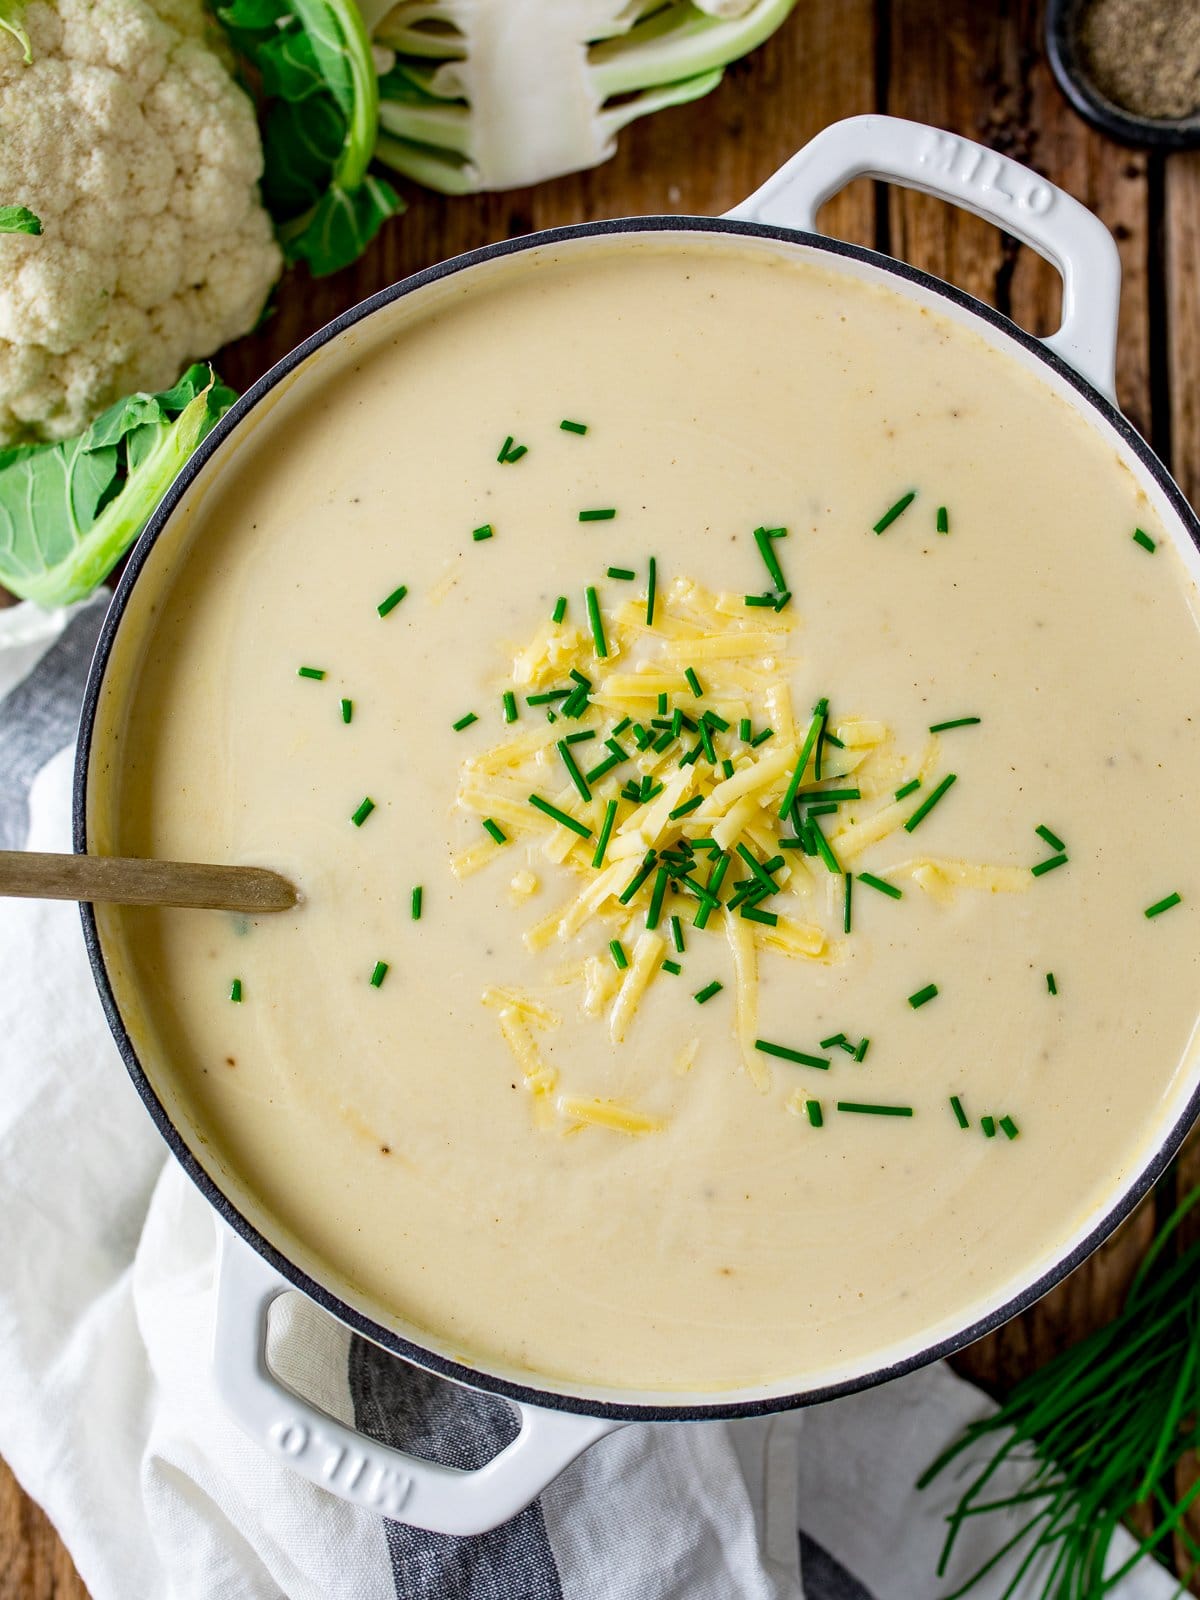 Overhead image of a large pan filled with cauliflower soup topped with grated cheese and chopped chives